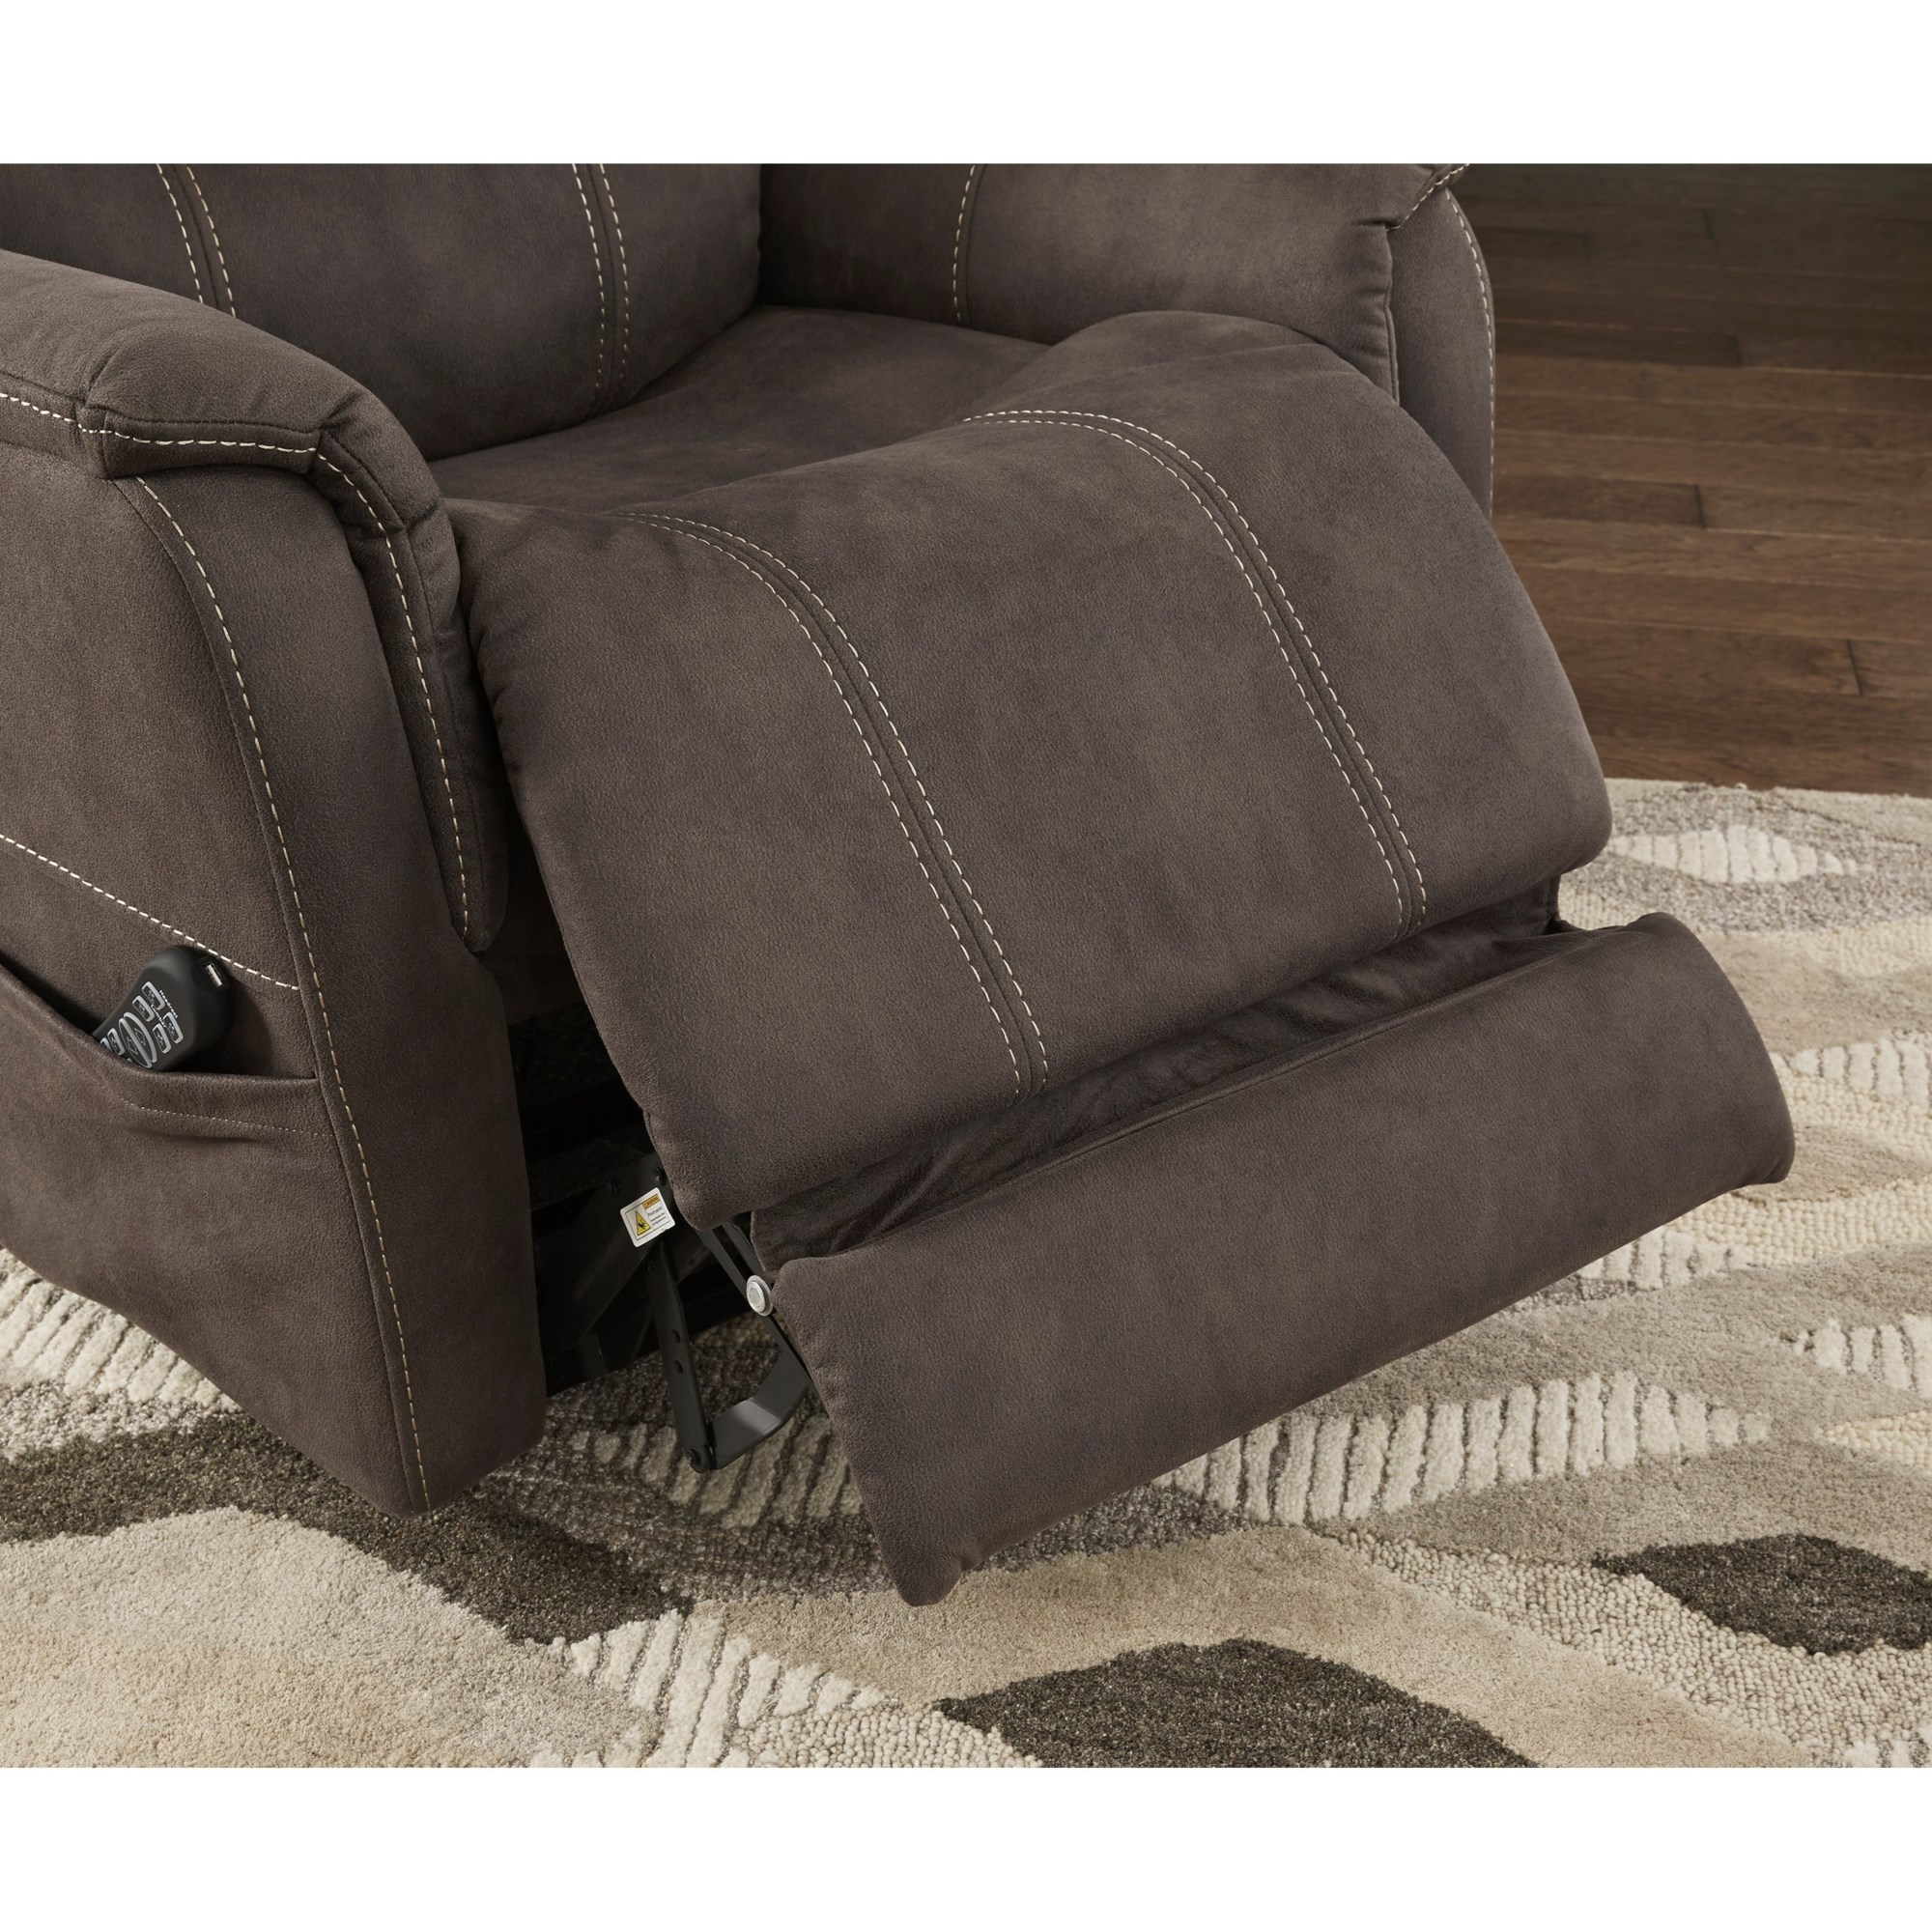 Signature Design by Ashley Ballister 21604-12 Power Lift Recliner with  Power Adjustable Lumbar and Headrest, Furniture and ApplianceMart